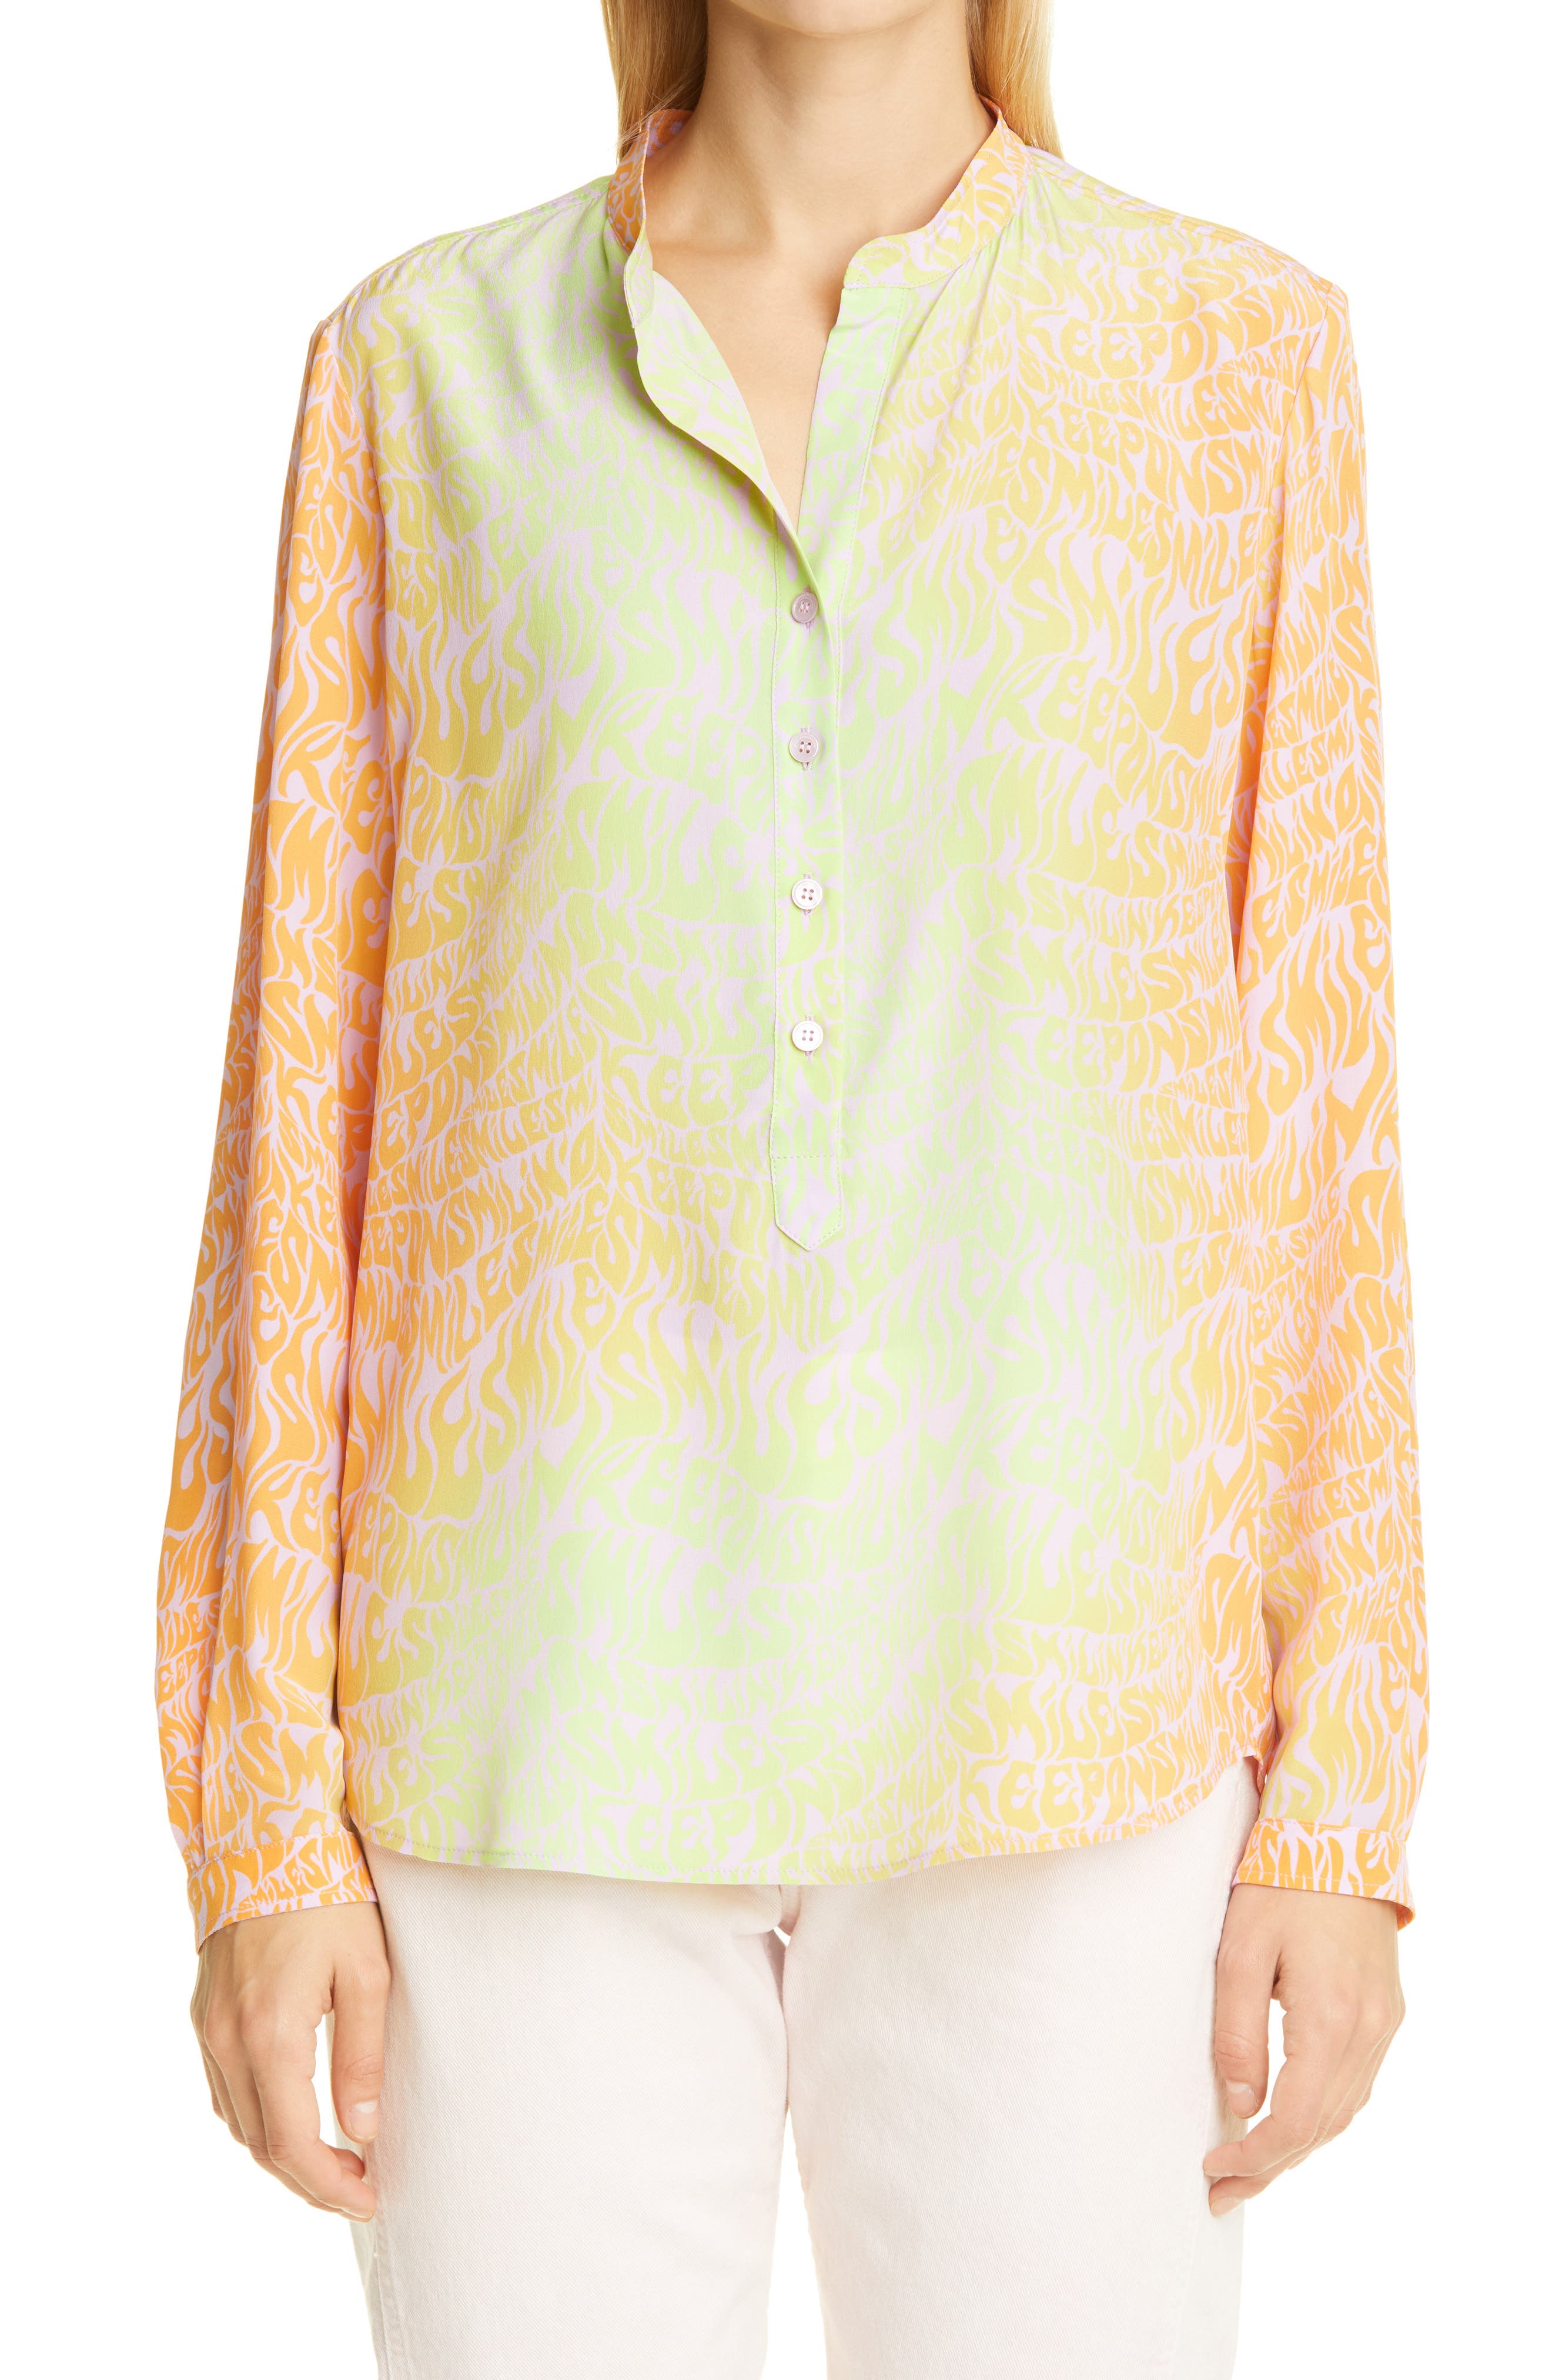 Stella McCartney Keep on Smiling Print Silk Blouse in Orchid at Nordstrom, Size 2 Us